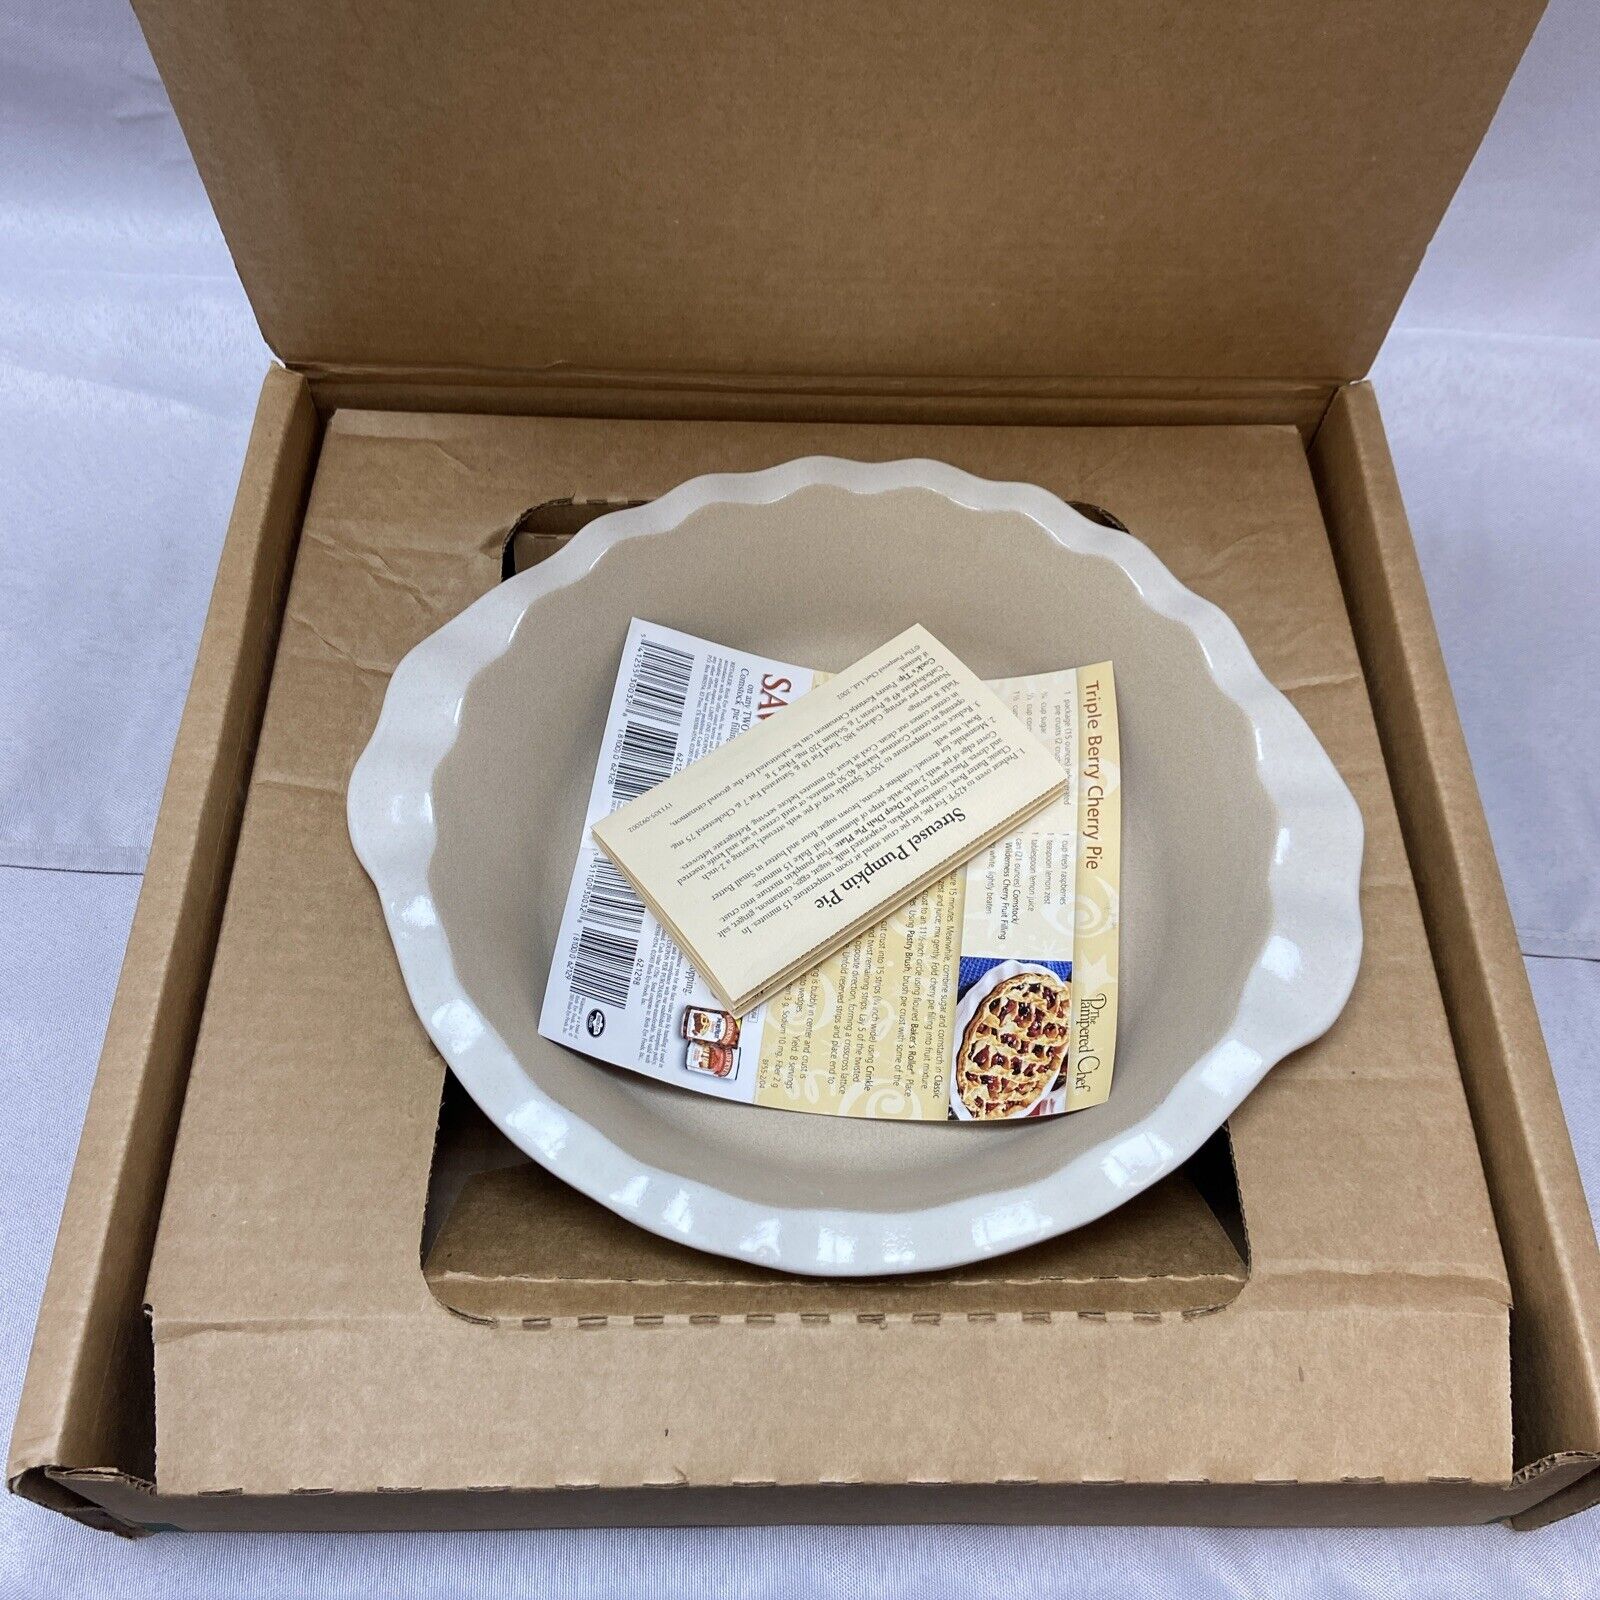 The Pampered Chef Deep Dish Pie Plate Model 1305